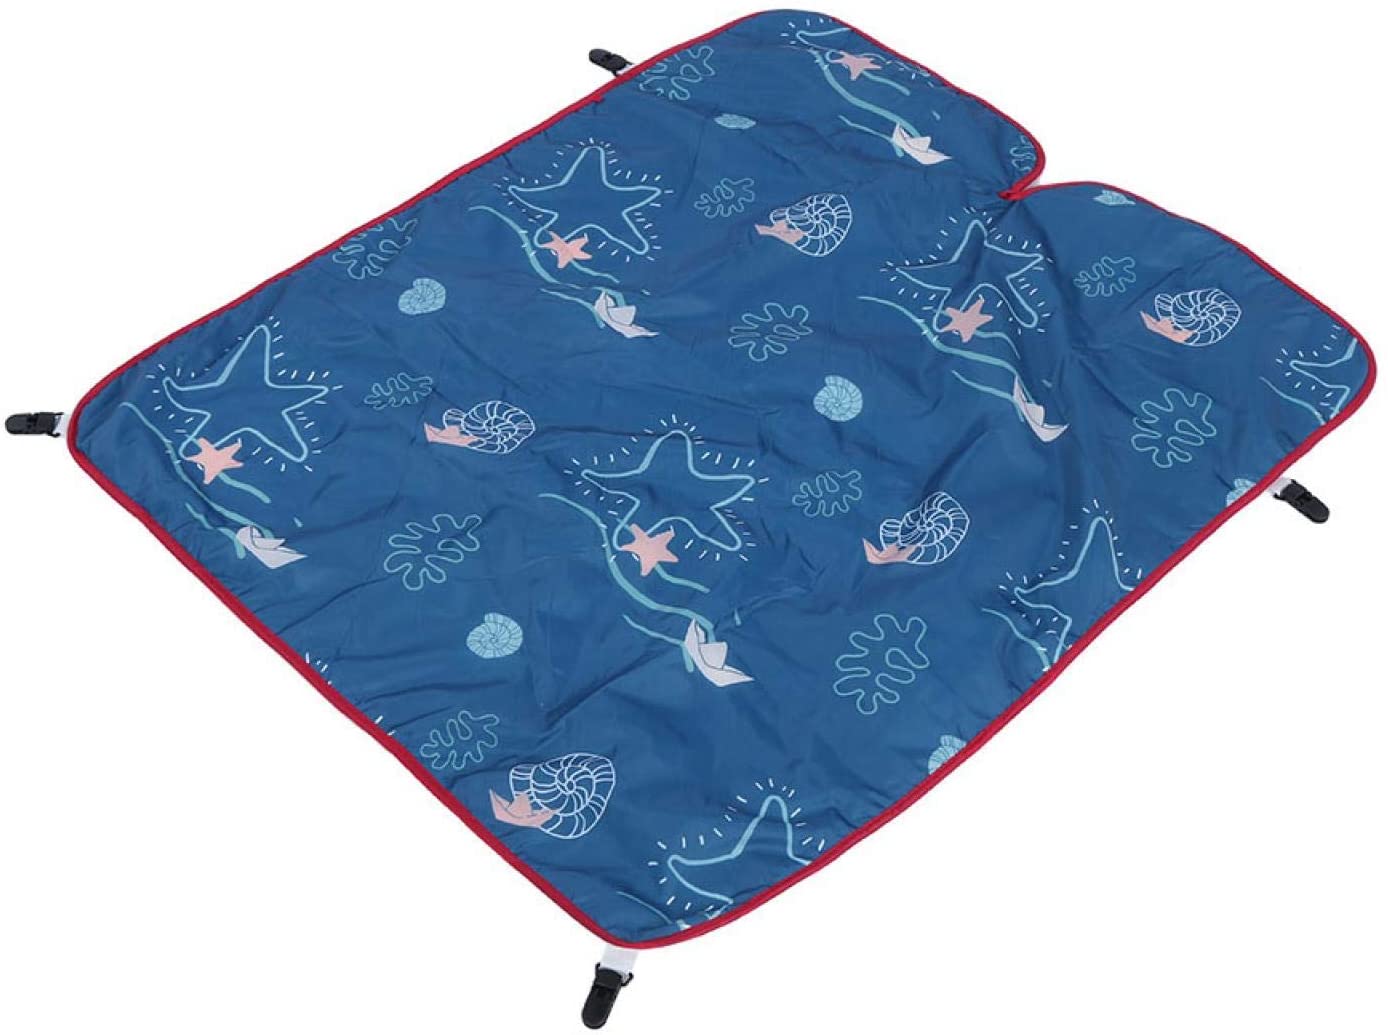 KUIDAMOS Car seat blankets 85 x 64 cm for going out (tropical seabed, 85 x 64 cm).